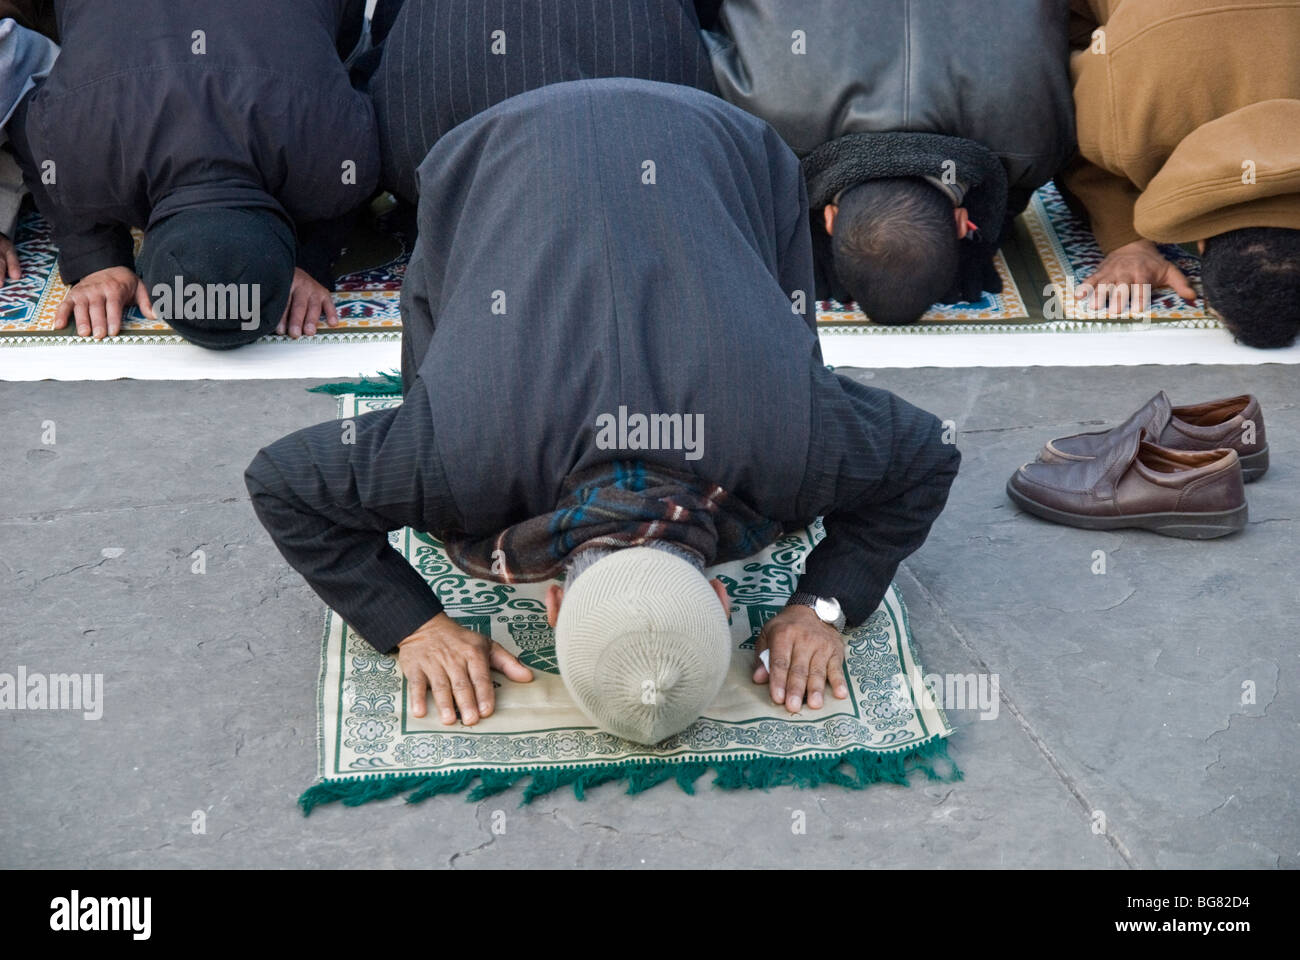 MUSLIMS/IMAM PERFORM SALAAT IN TRAFALGAR SQUARE WITH THE GROUP OF MUSLIMS Stock Photo